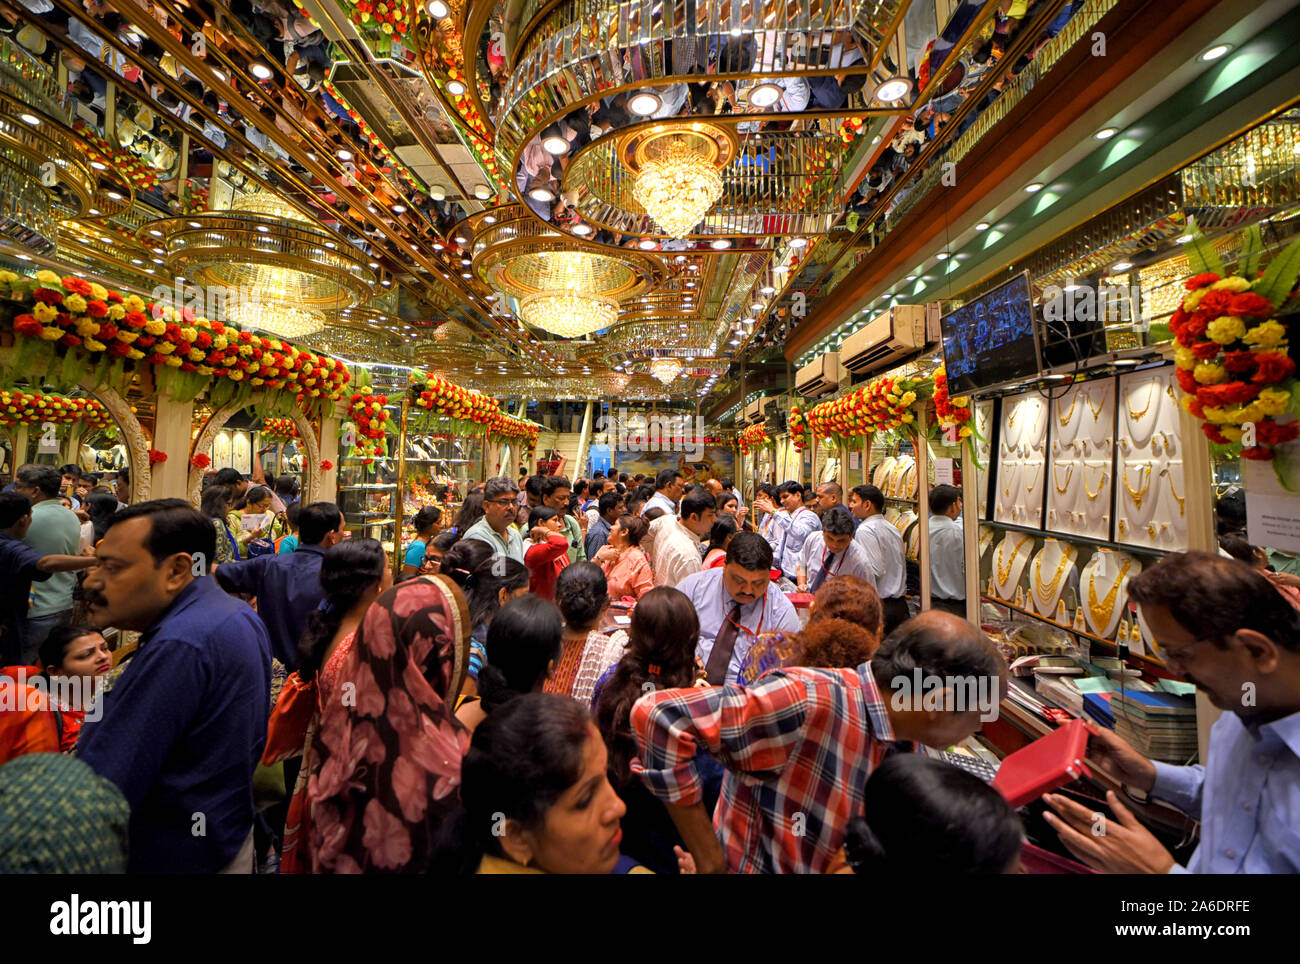 Kolkata, India. 25th Oct, 2019. A Jewellery shop in Kolkata is crowded with  buyers during the Auspicious Dhanteras Festival day.Dhanteras is the most  auspicious occasion for buying gold as per Hindu mythology